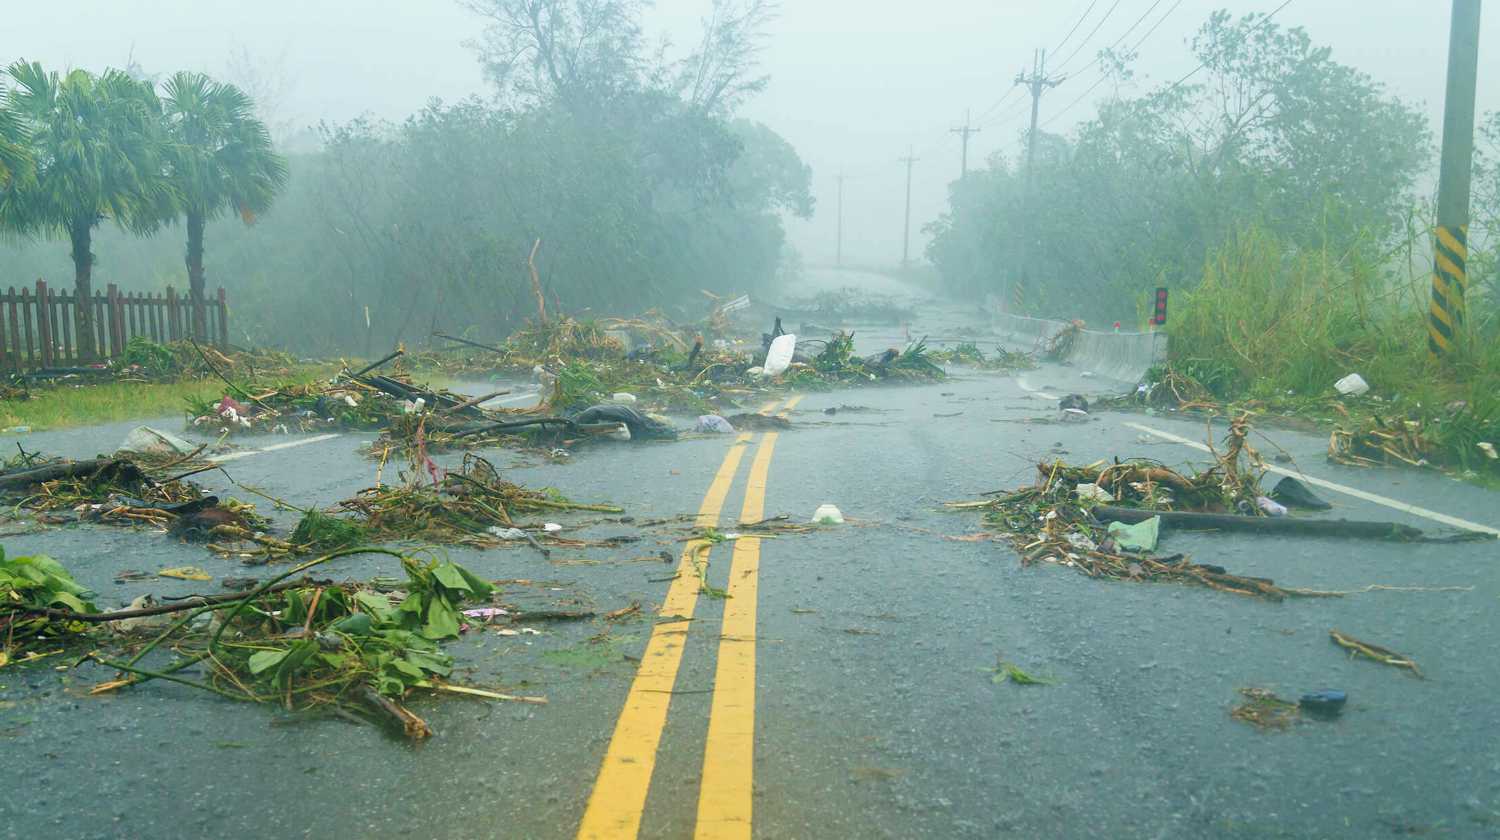 Feature | debri blocking the road | Tax Relief For Natural Disaster Victims | casualty loss